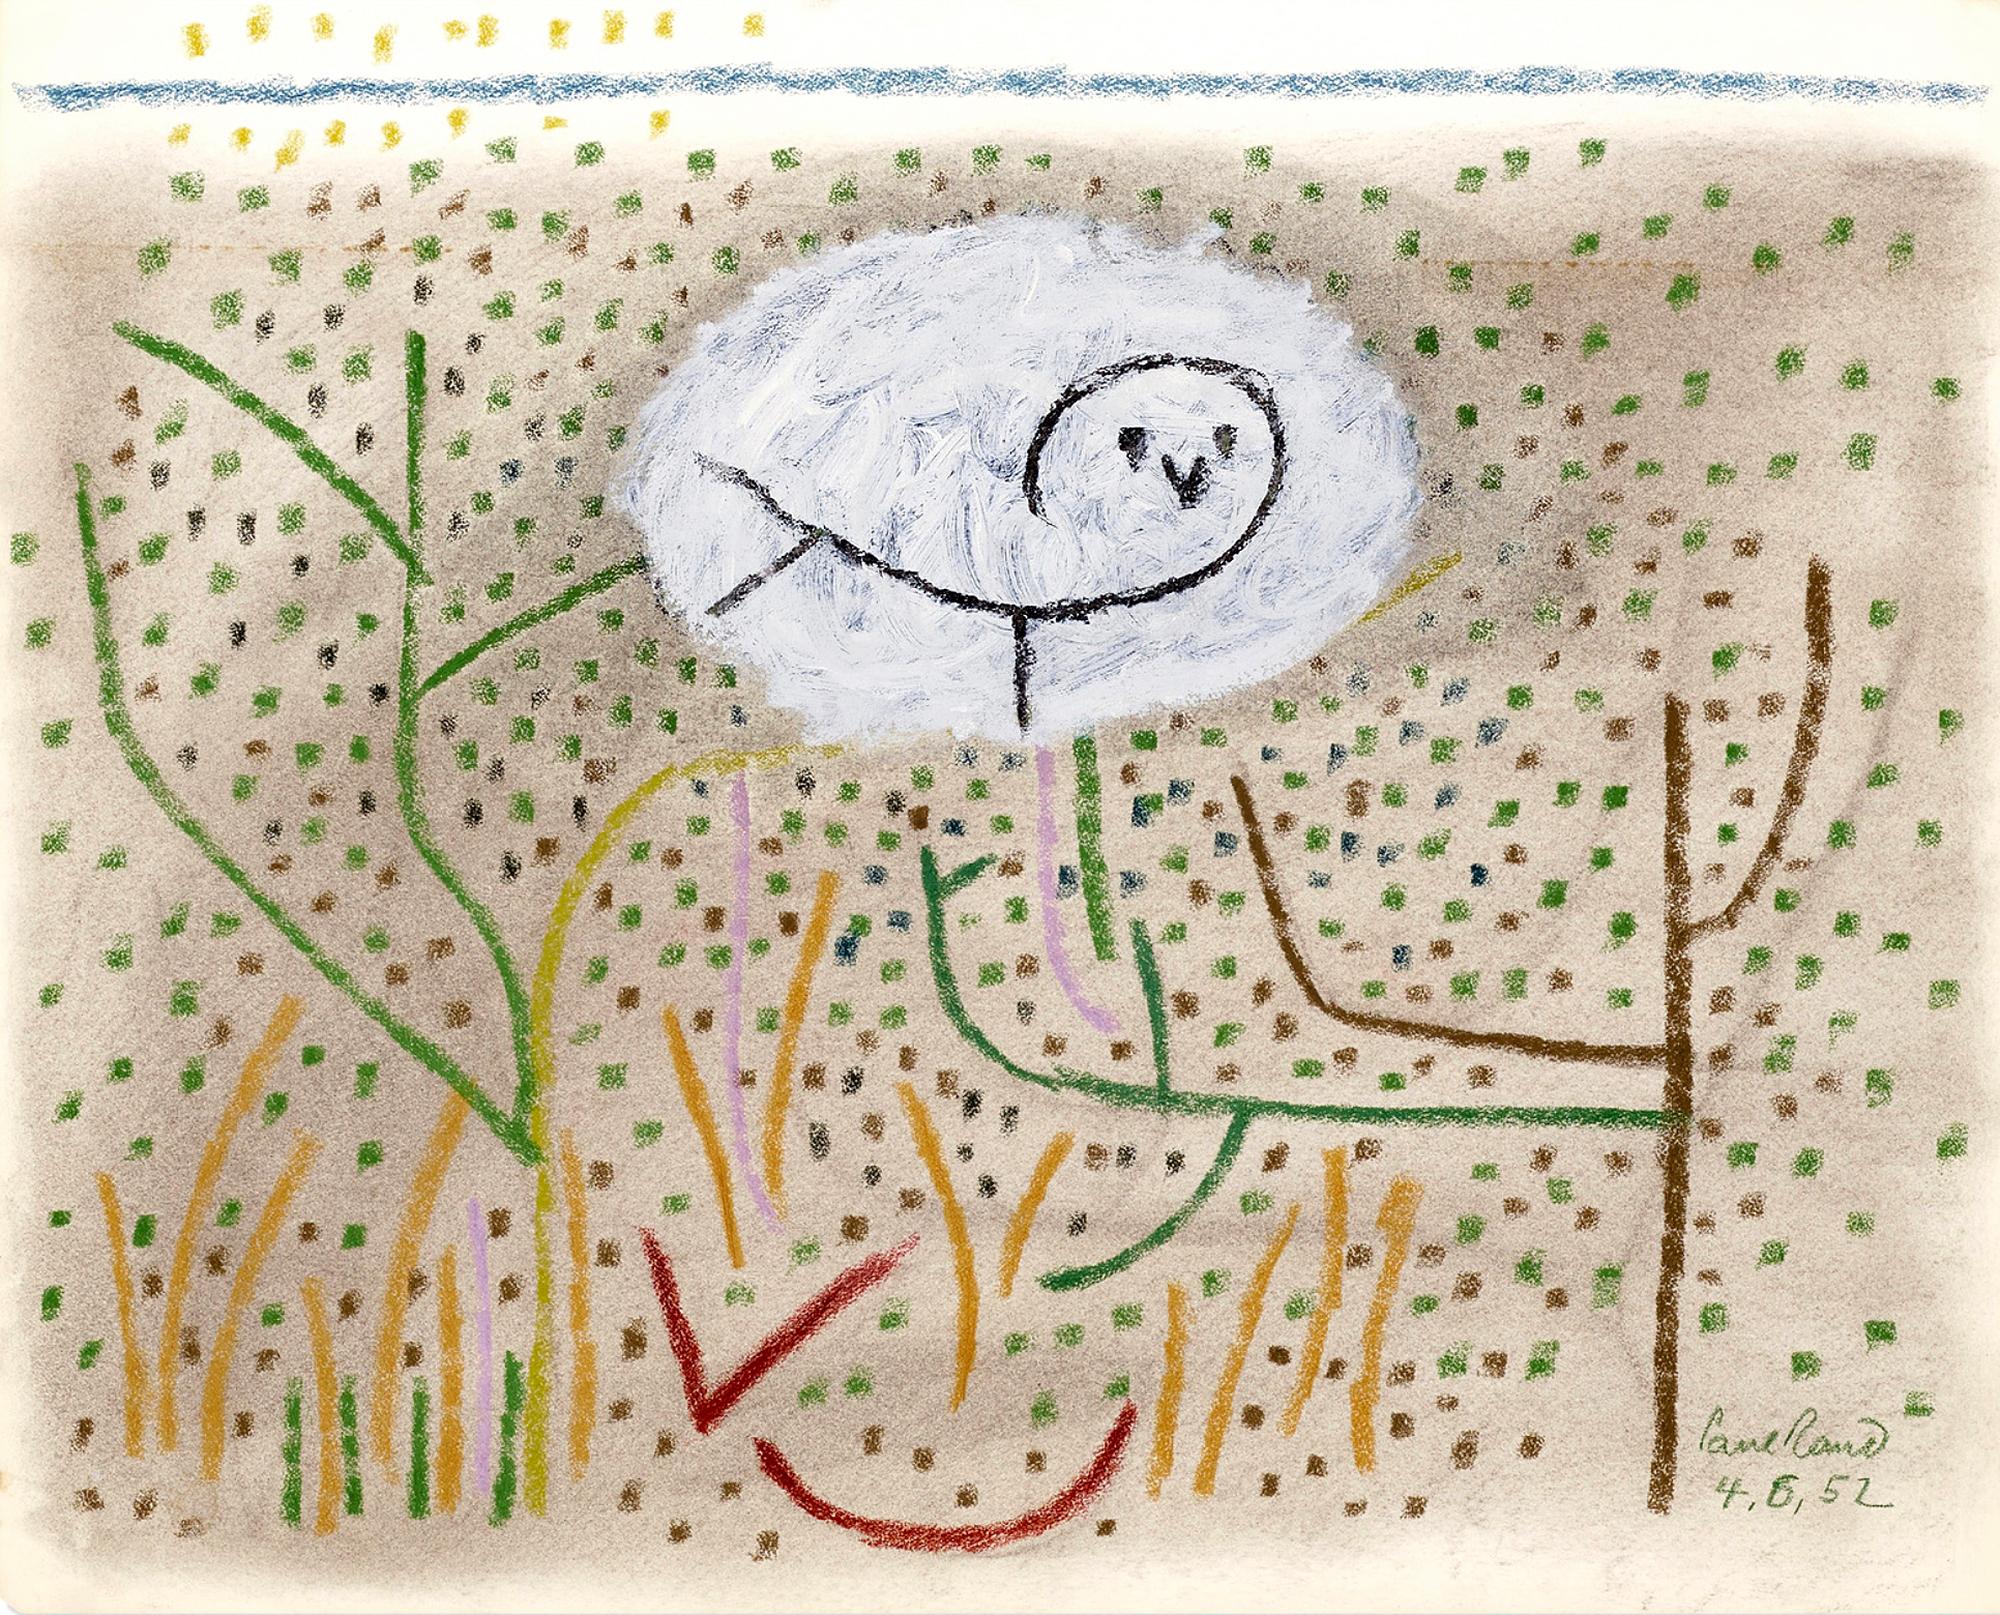 Paul Rand Animal Art - Untitled Owl in the Grass